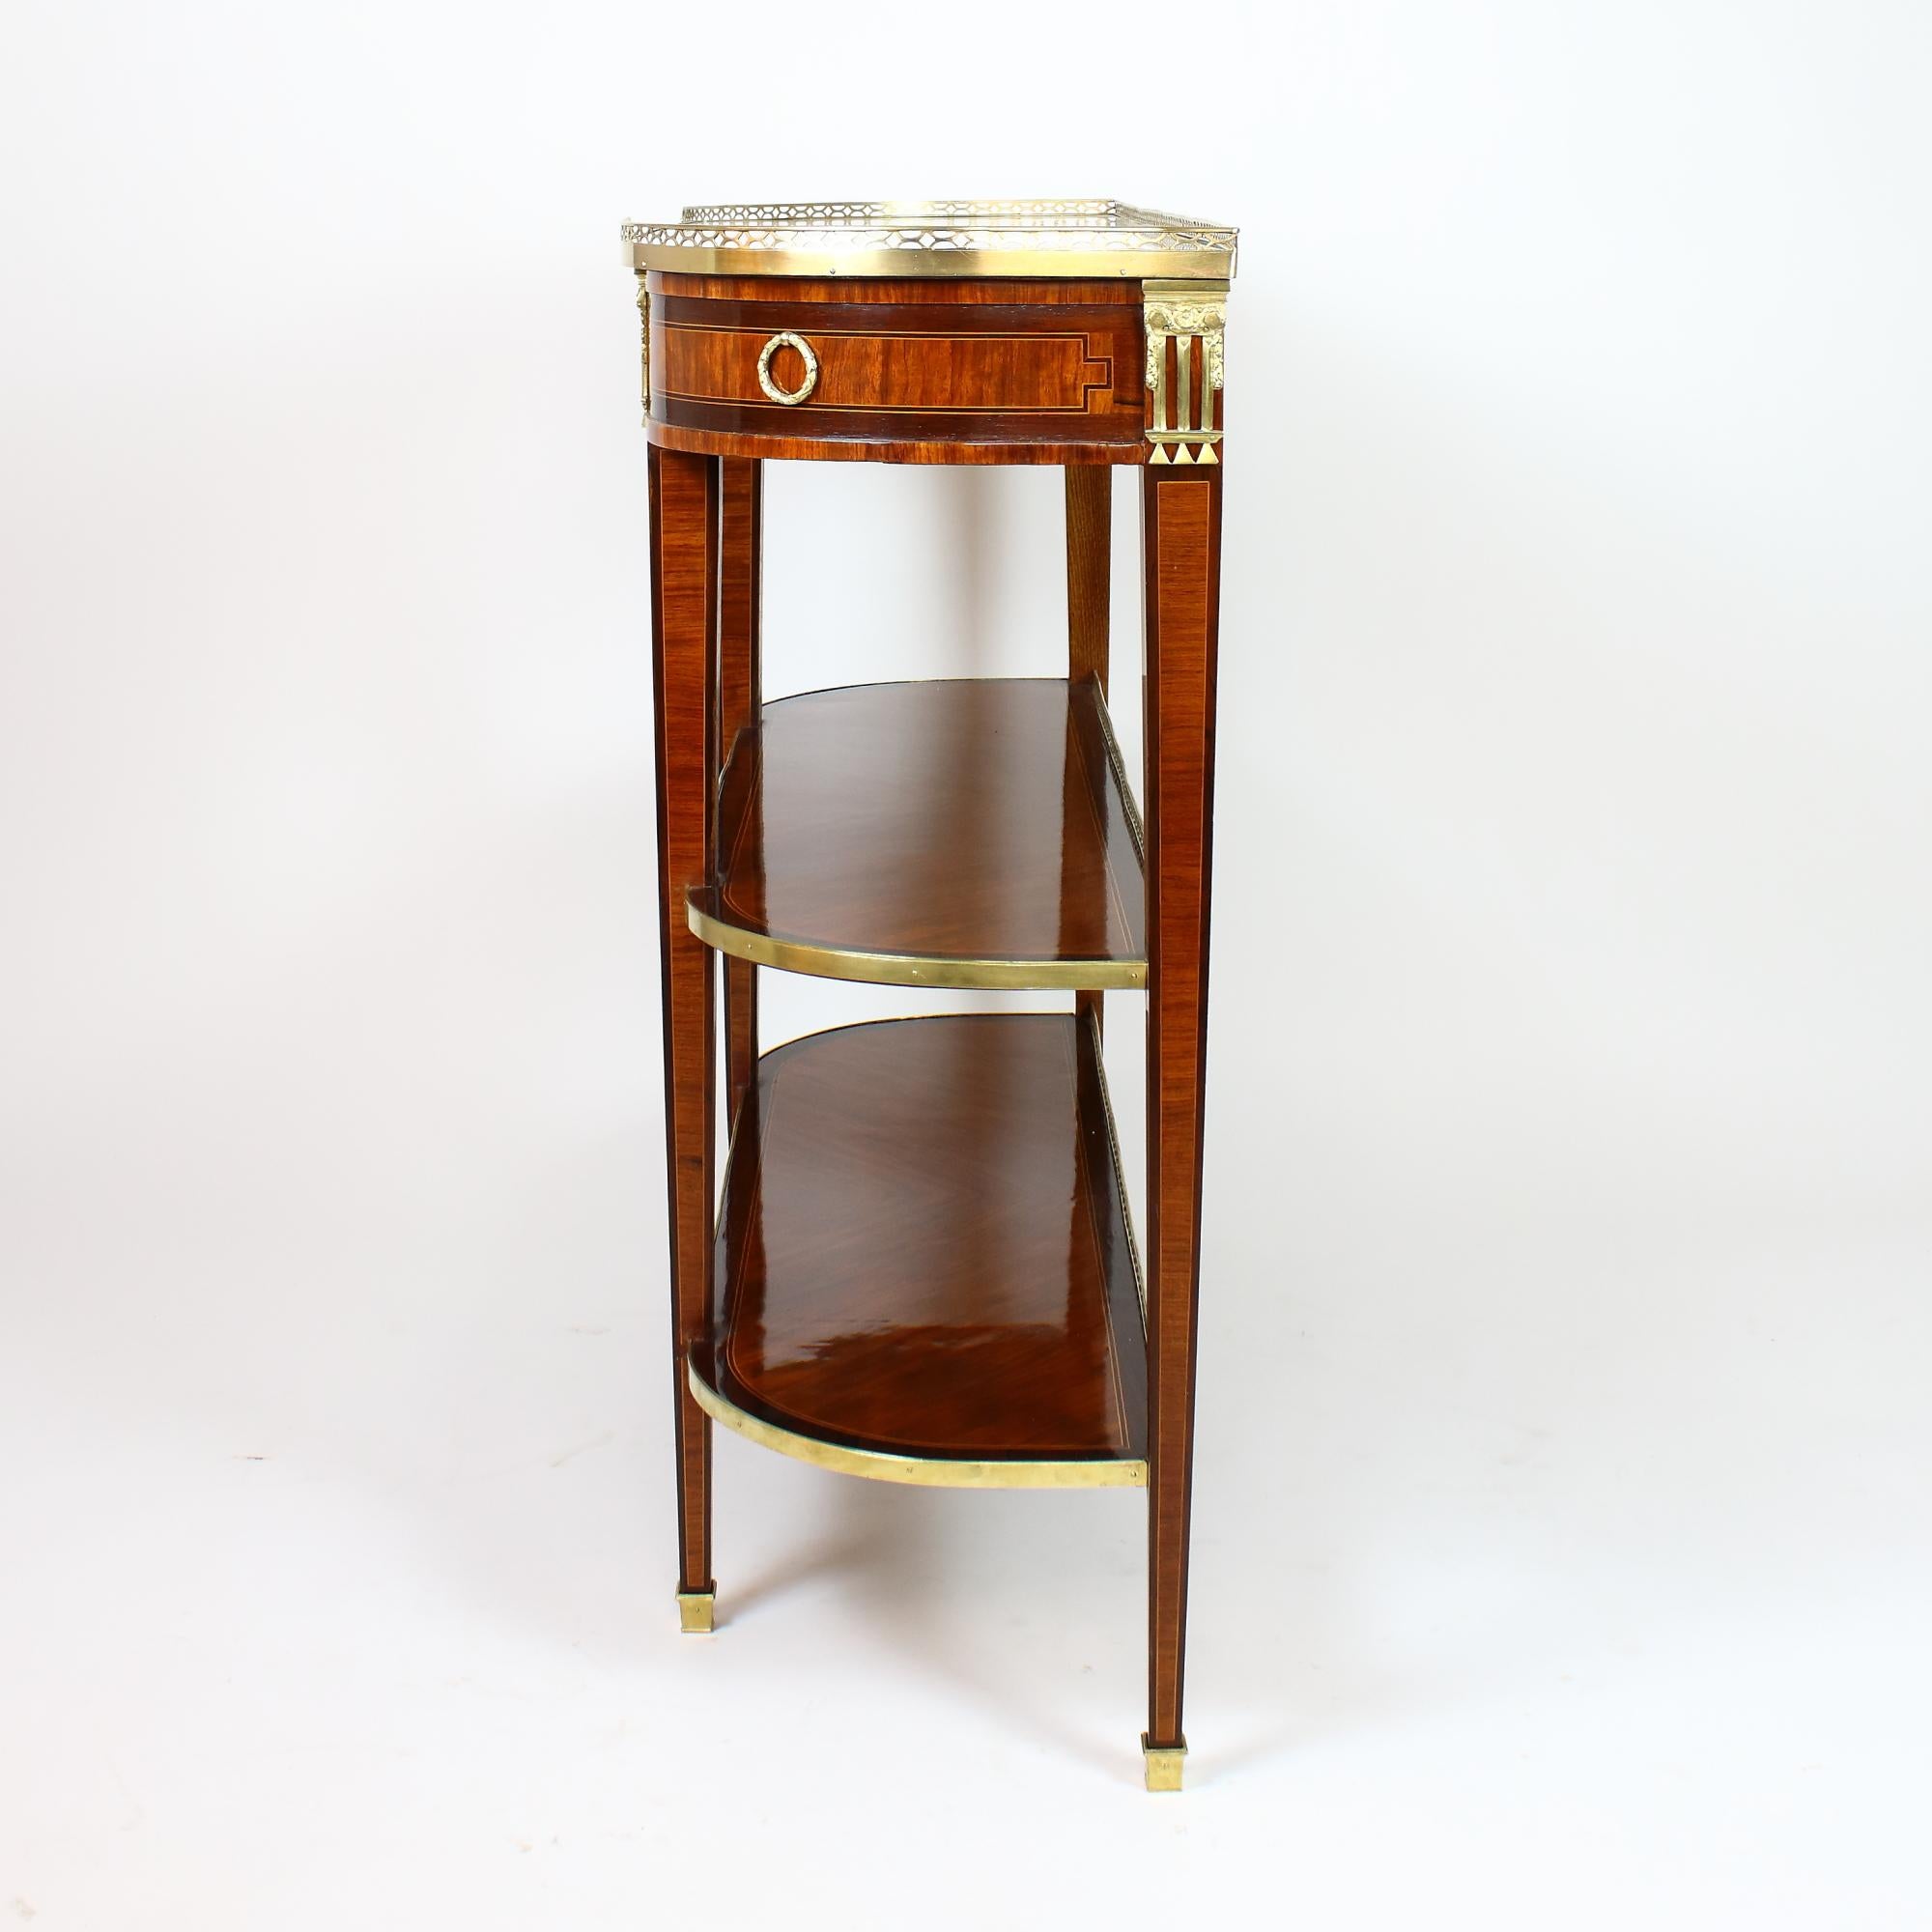 Late 18th century French Louis XVI marquetry console table or desserte.

Rectangular console table with extended width and rounded corners standing on four rectangular tapering legs, front with a frieze drawer accompanied by two trompe